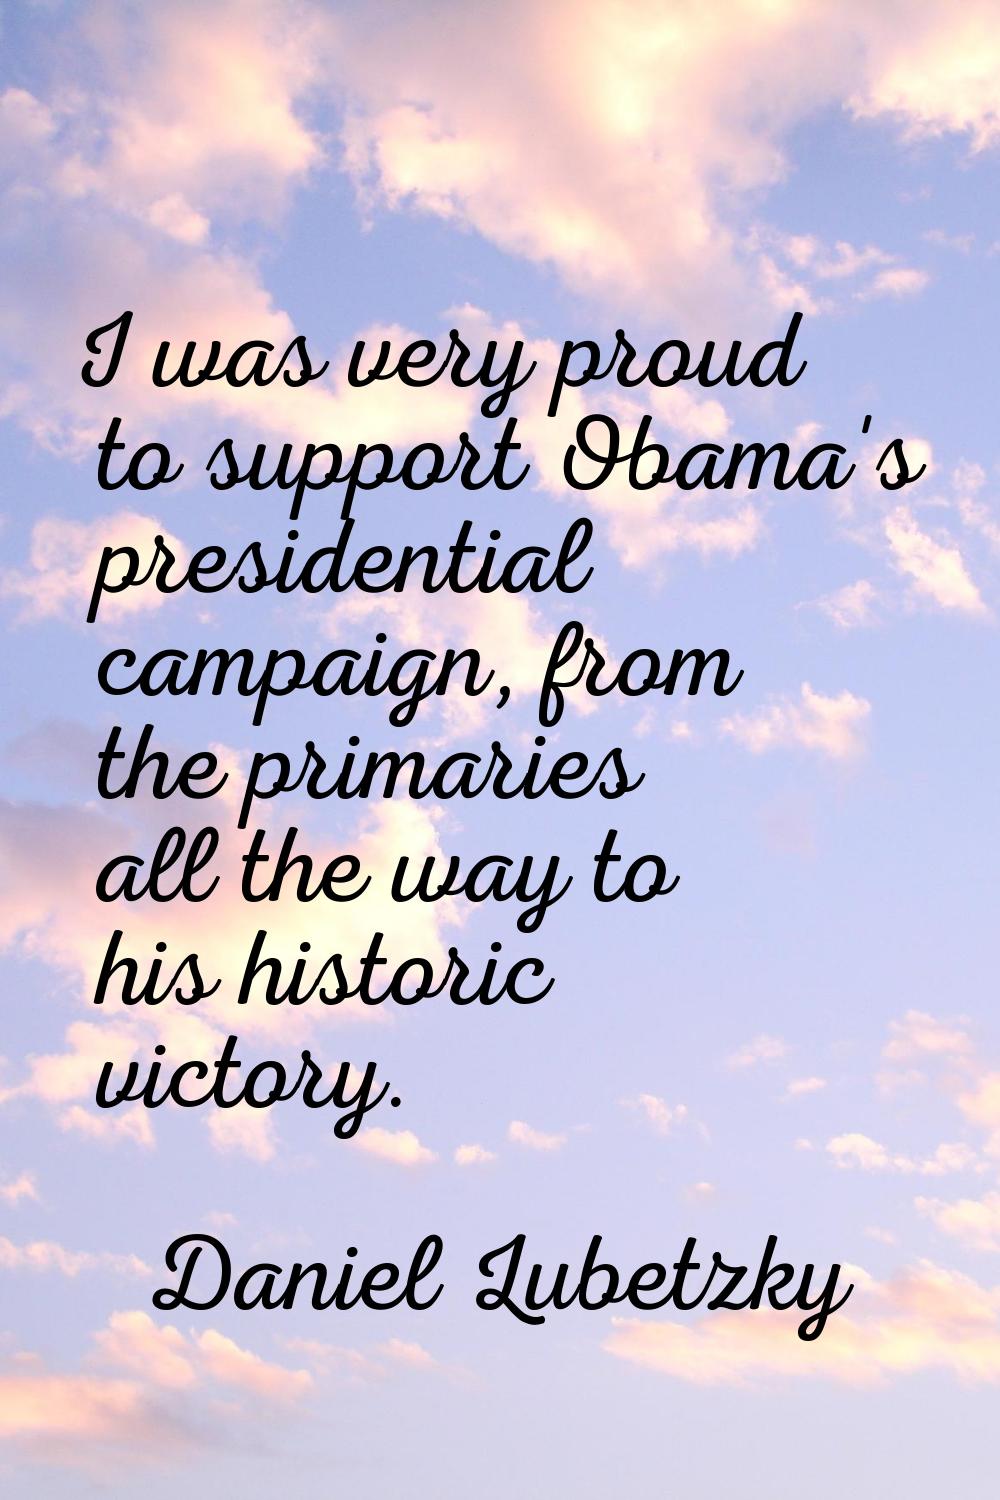 I was very proud to support Obama's presidential campaign, from the primaries all the way to his hi